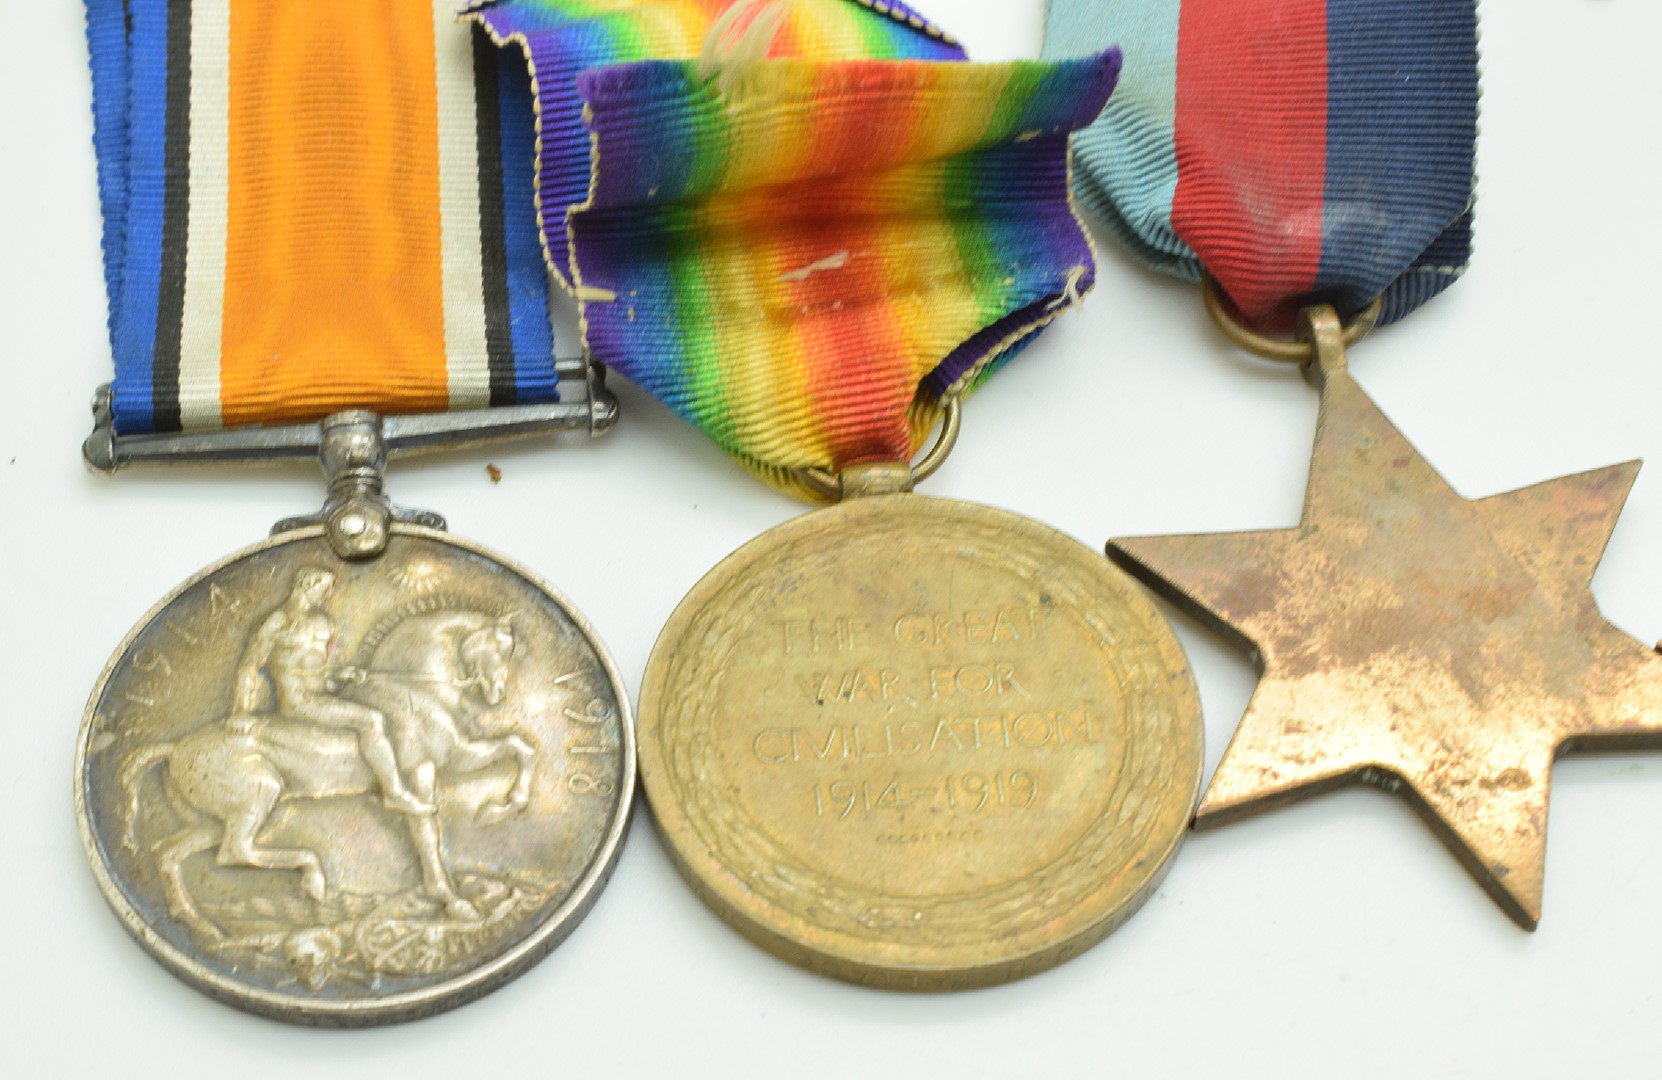 British Army WW1 medals comprising Victory Medal and War Medal, both named to 56118 Private J H - Image 4 of 8